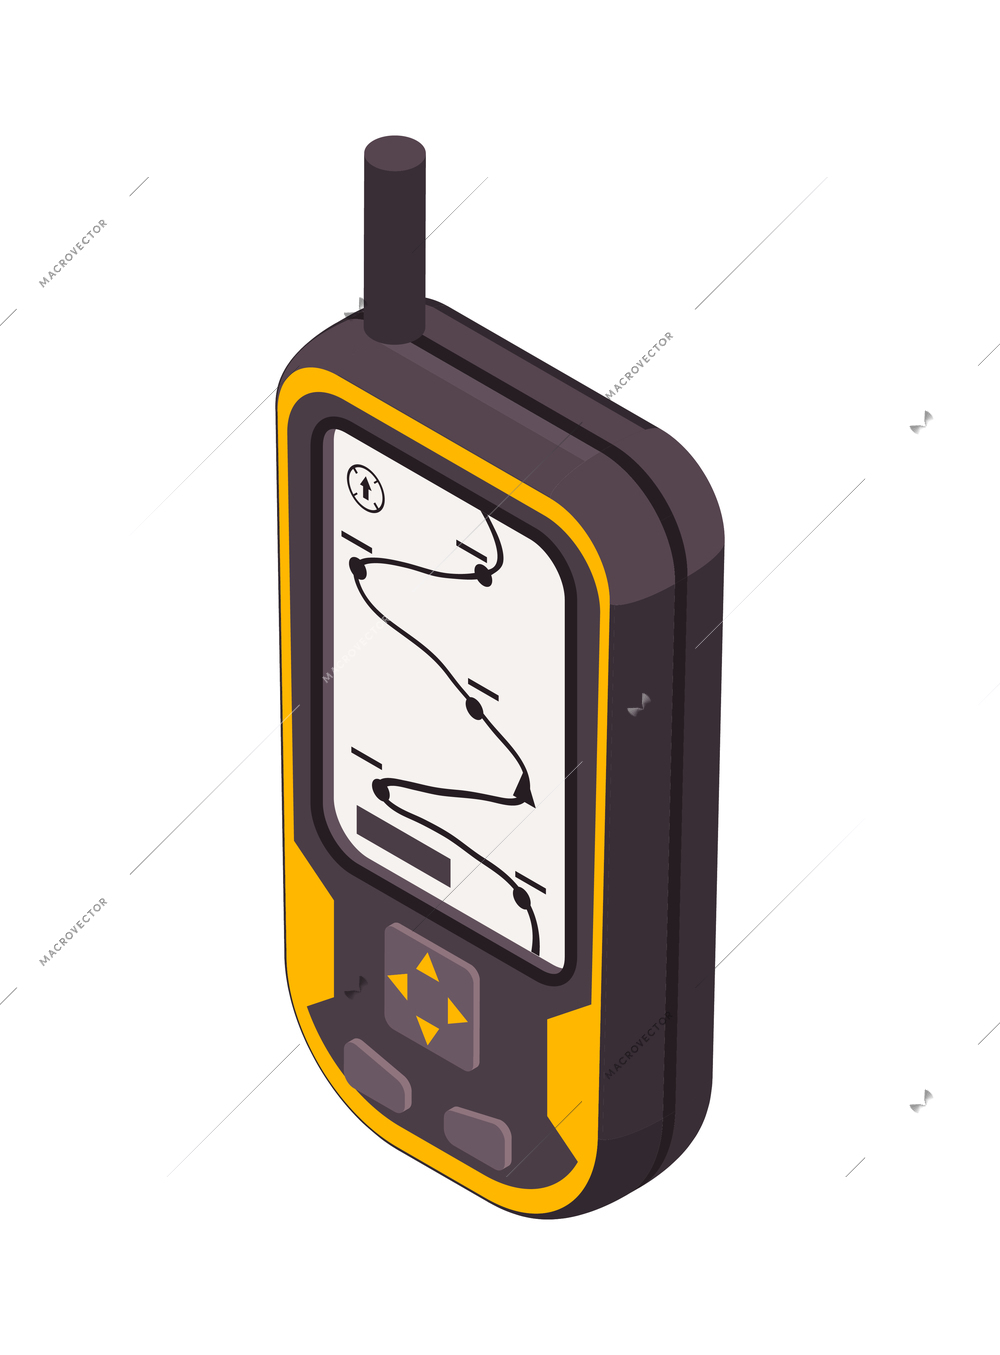 Walkie talkie isometric icon on white background 3d vector illustration